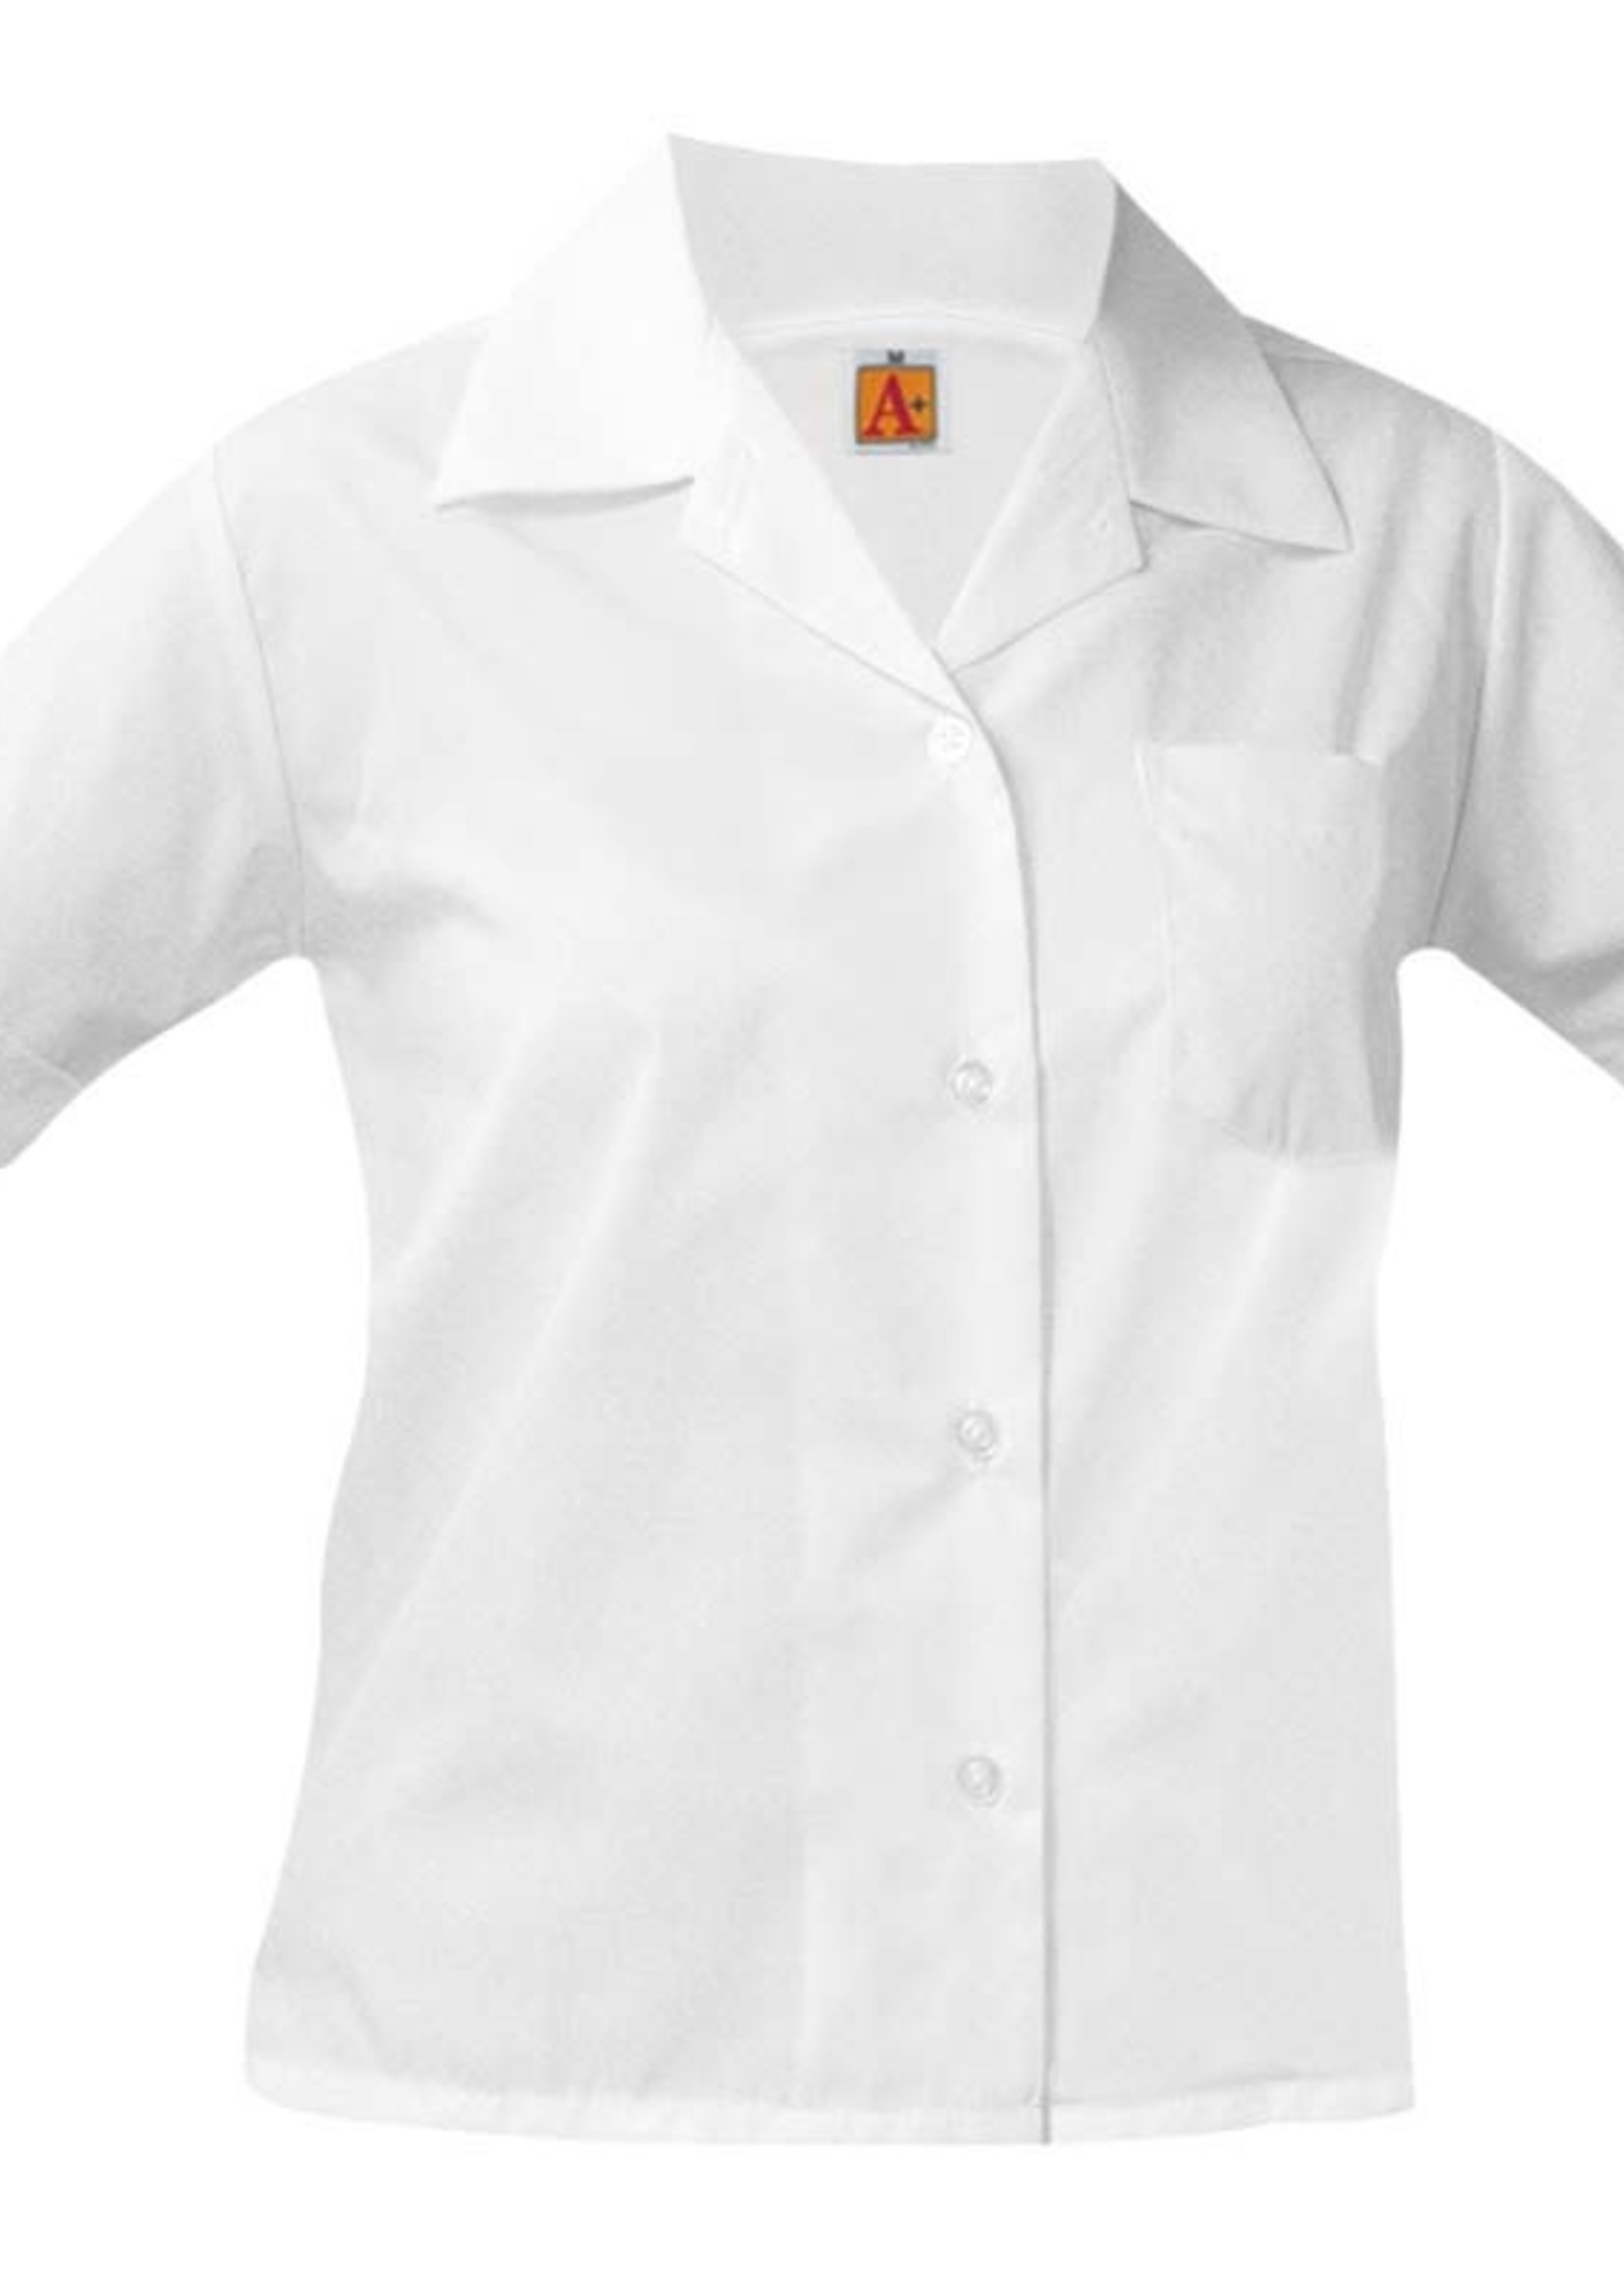 A+ White Short Sleeve Pointed Collar Blouse (Grades 4-5)